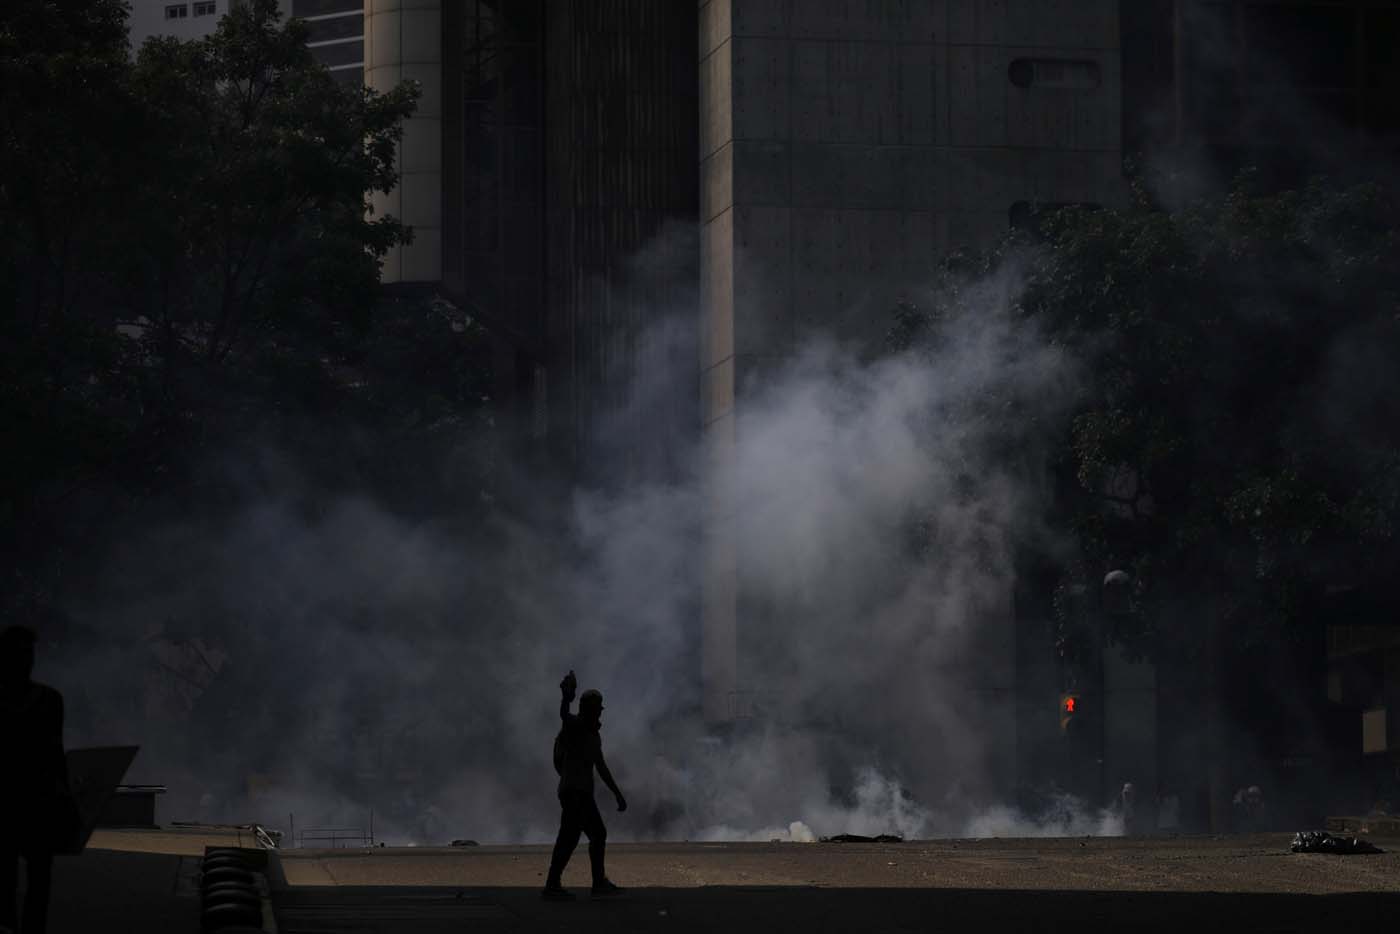 An opposition supporter clashes with security forces during a rally against Venezuela's President Nicolas Maduro in Caracas, Venezuela May 20, 2017. REUTERS/Carlos Barria